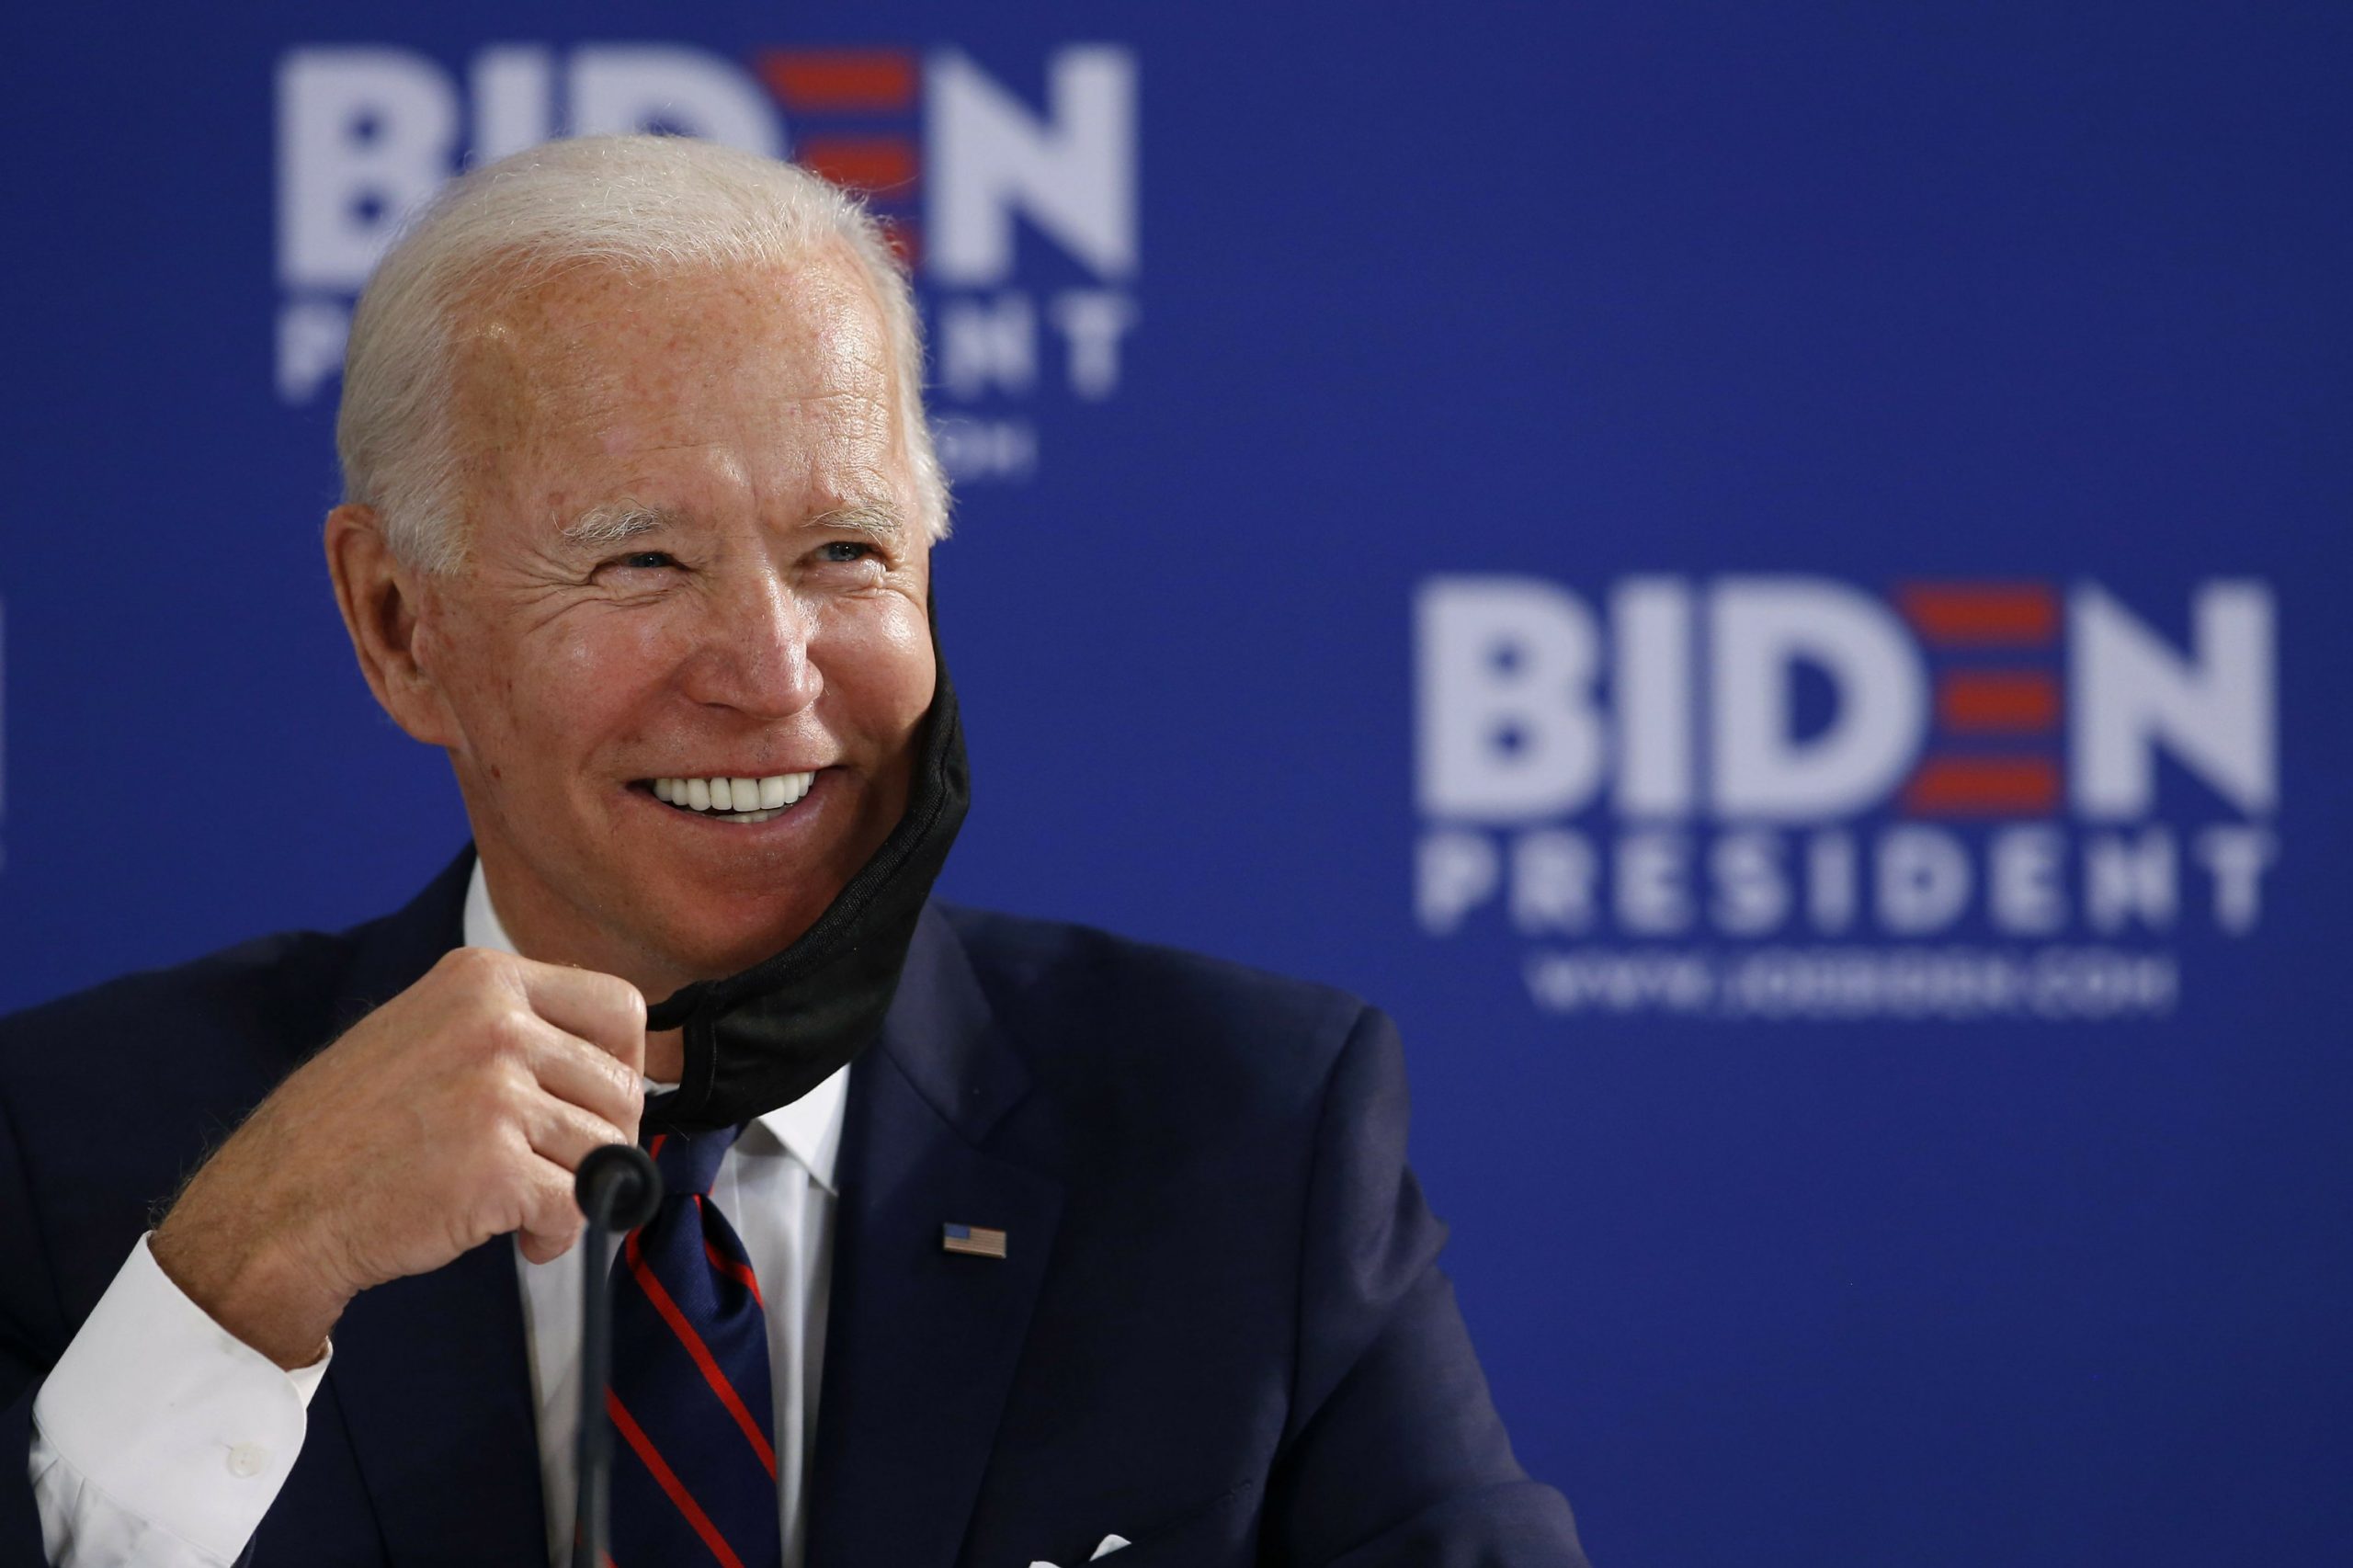 What can Indians expect from joe biden on immigration overhaul